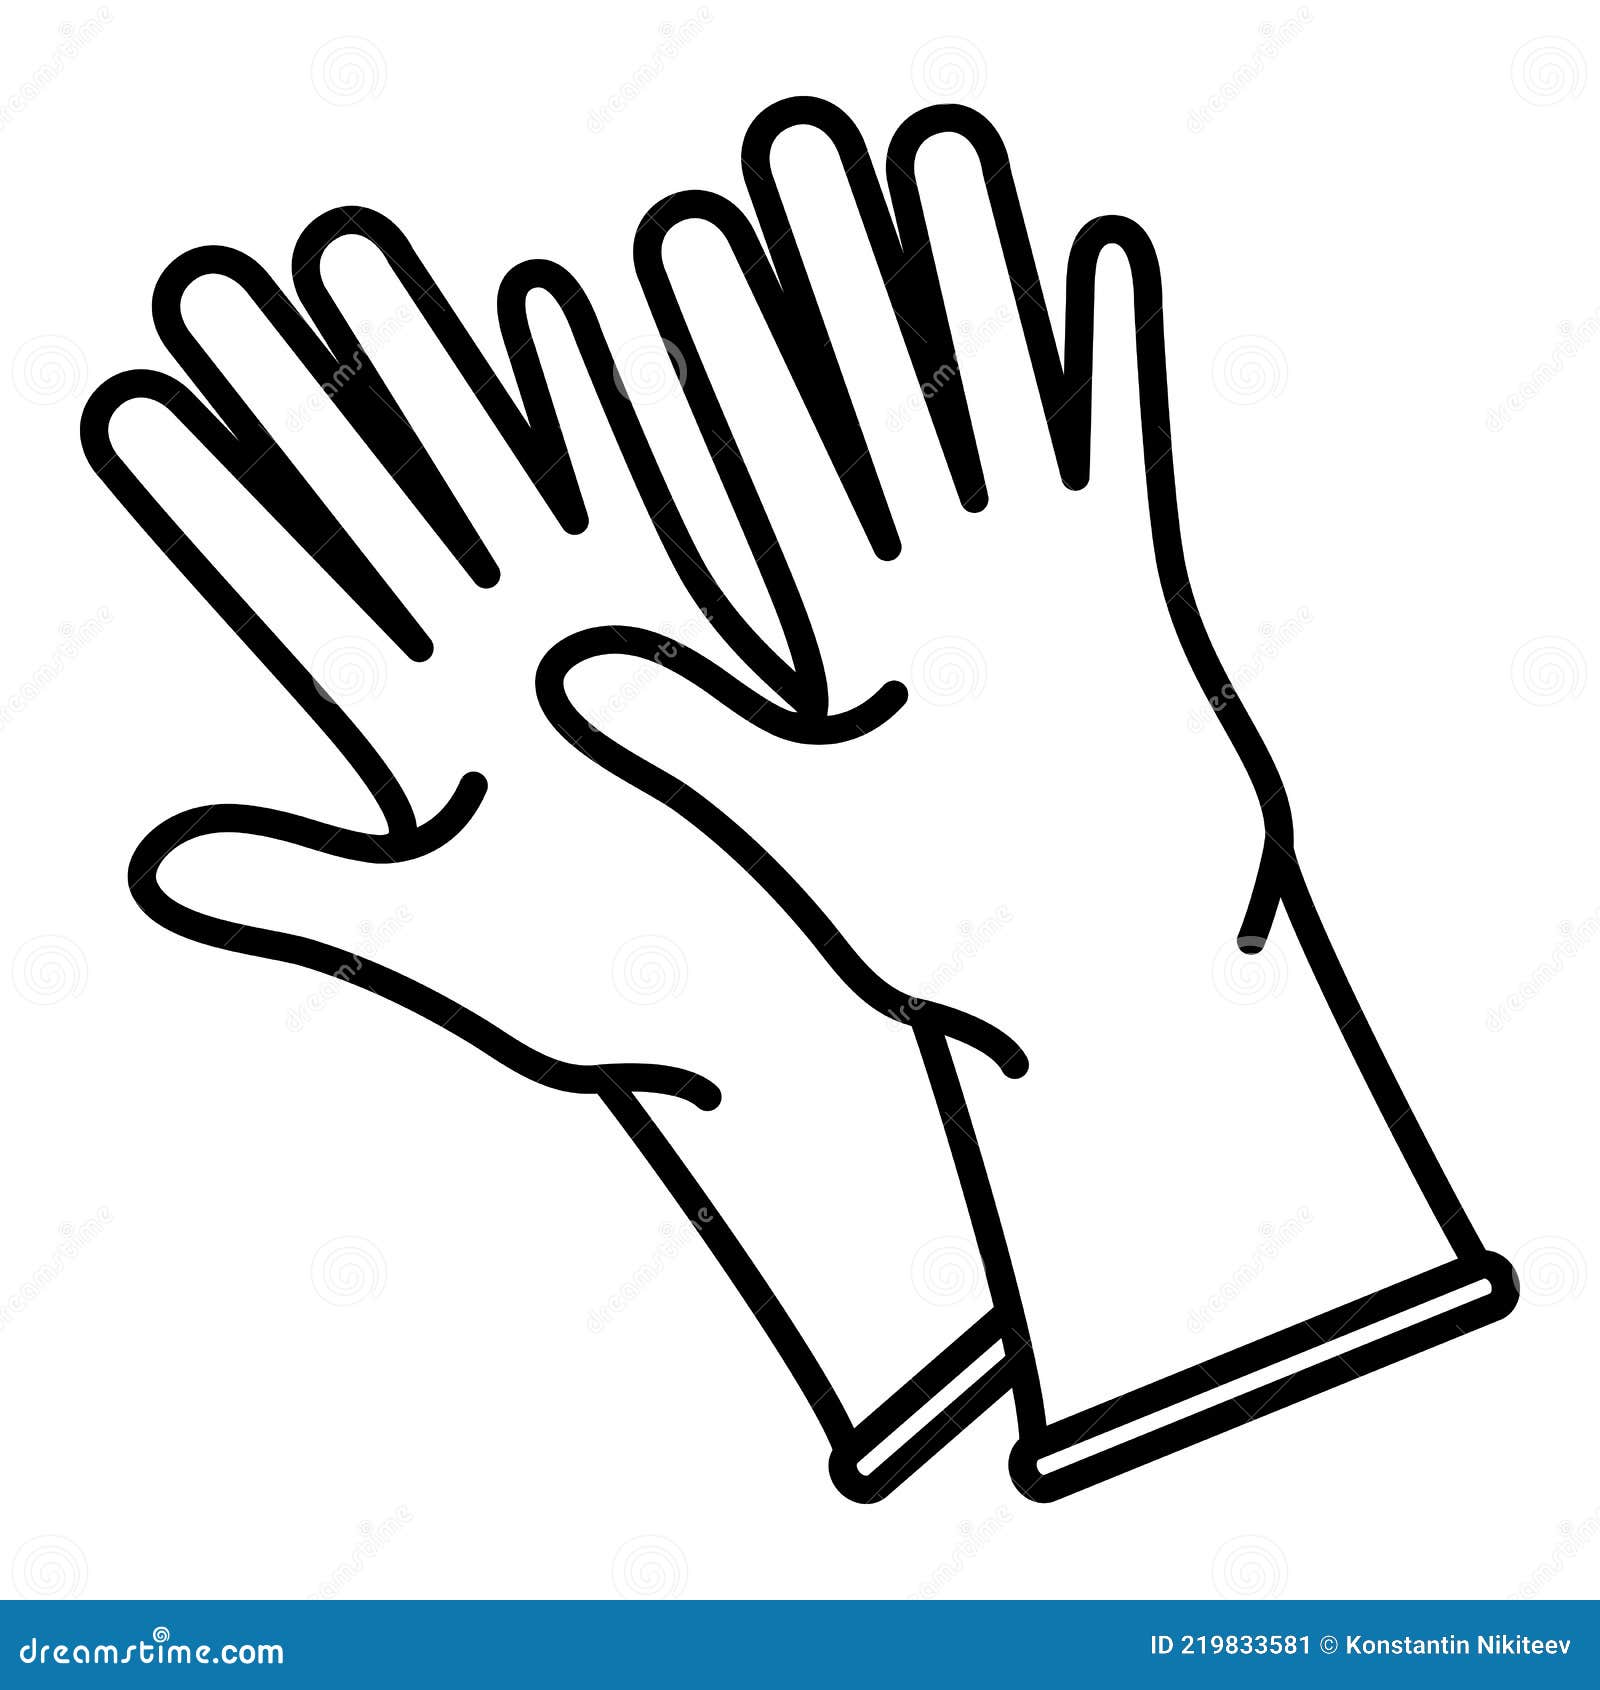 Rubber Gloves Icon on White Background Stock Vector - Illustration of ...